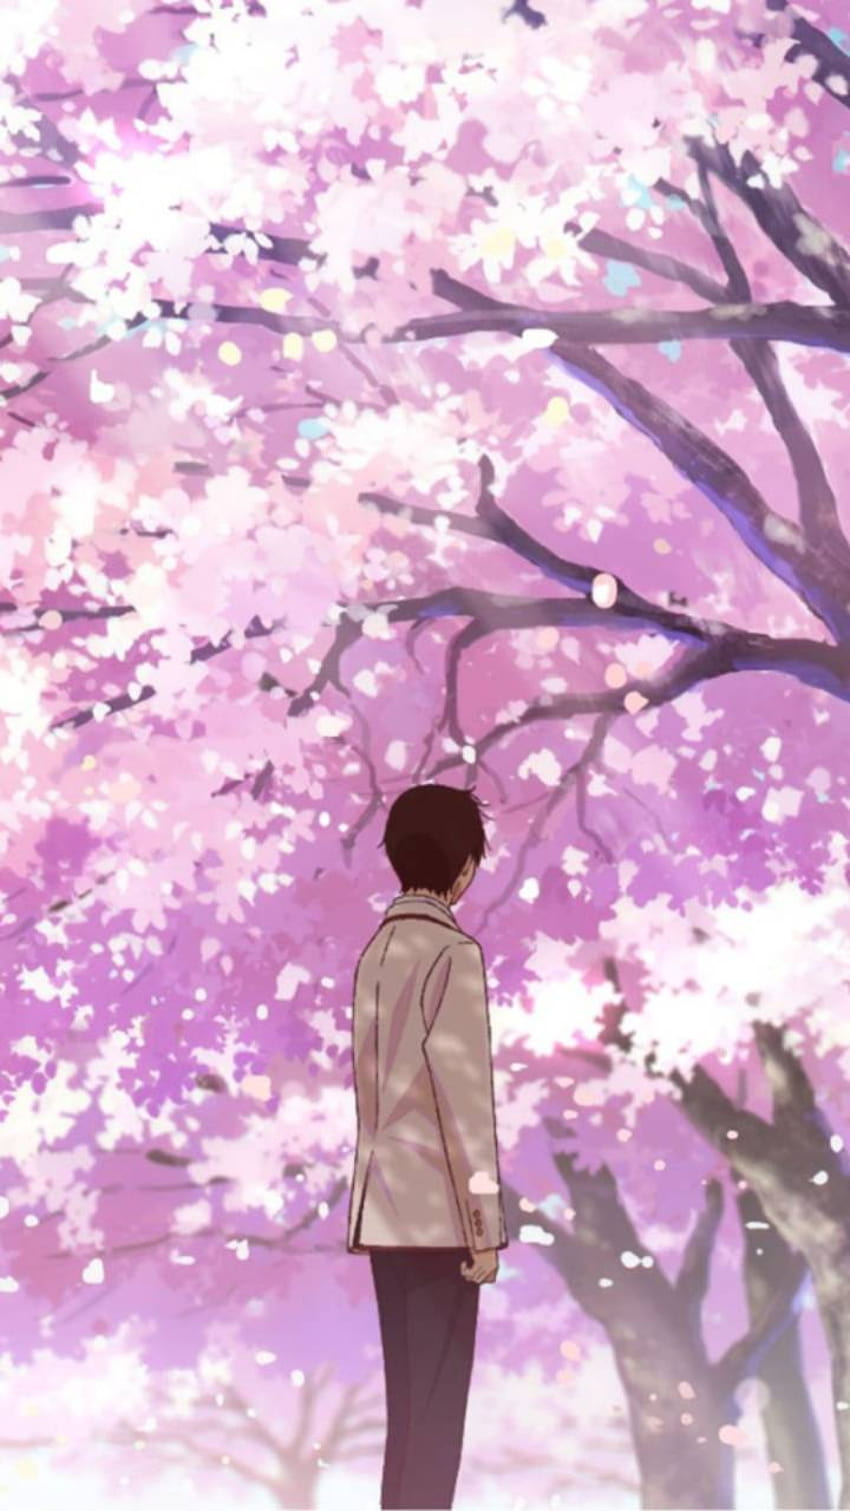 I Want To Eat Your Pancreas posted by Ryan Cunningham, i want to eat your pancreas mobile HD phone wallpaper